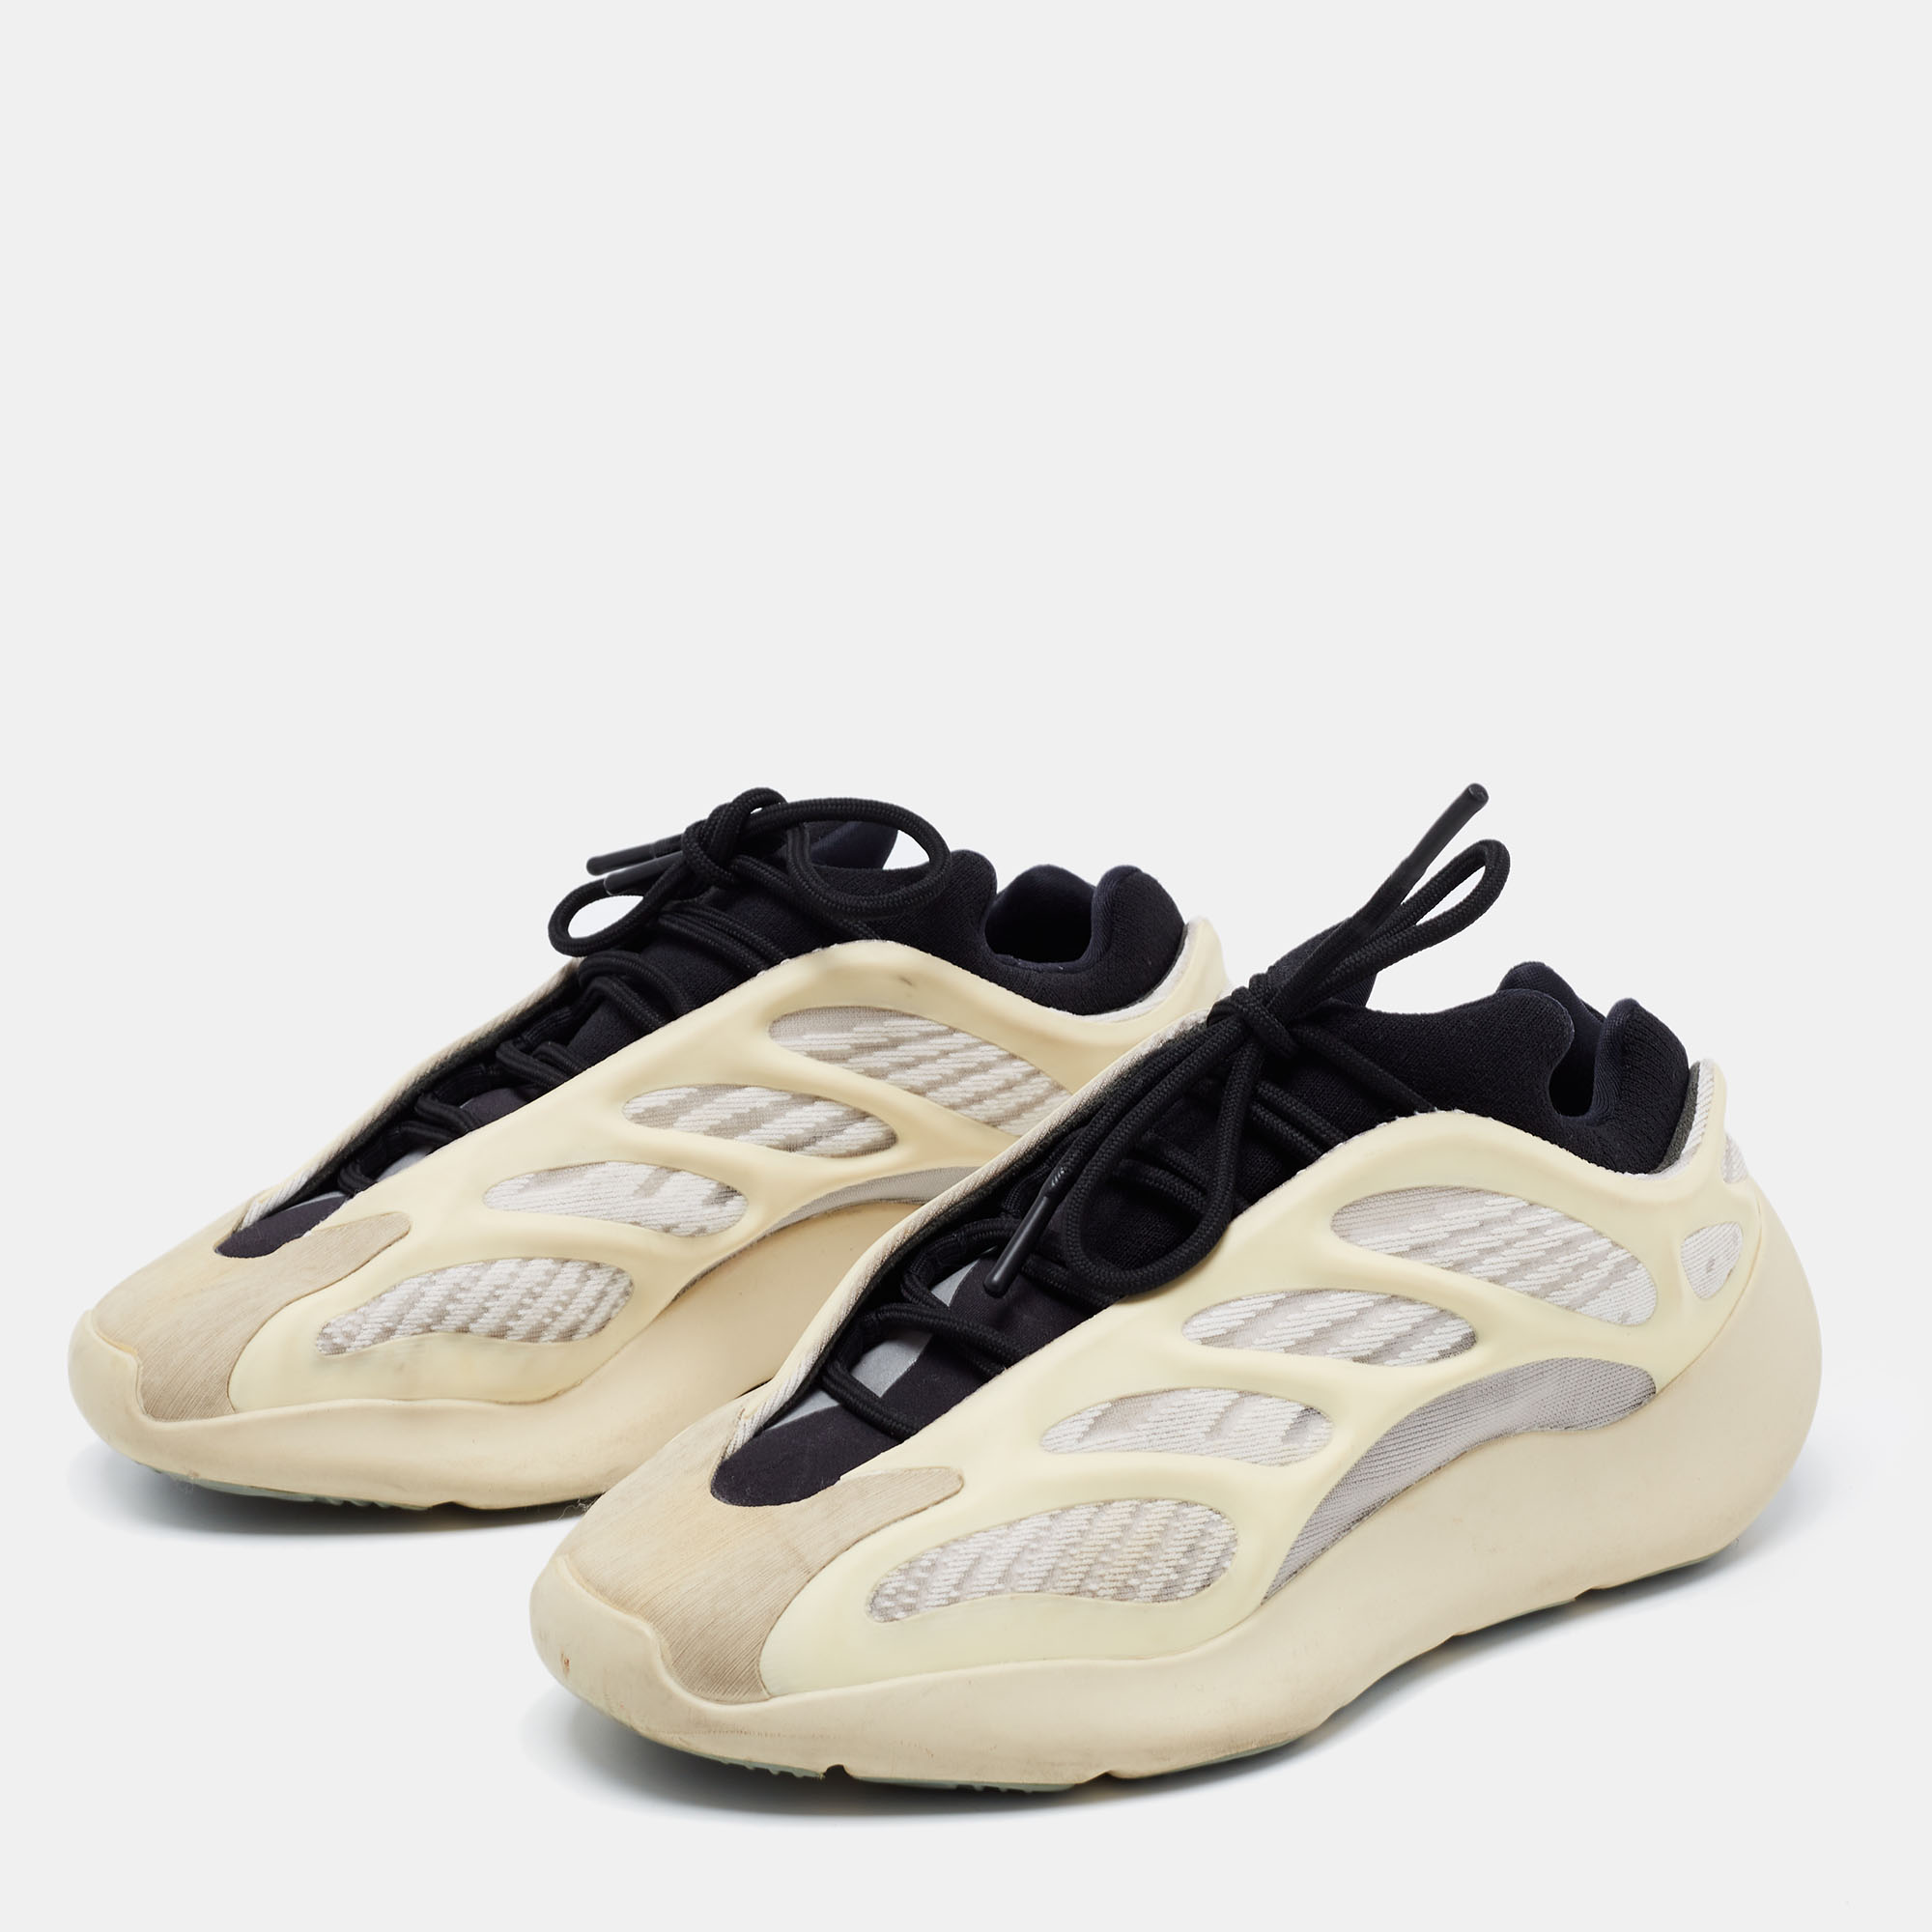 

Yeezy x adidas Tricolor Rubber and Fabric Yeezy 700 V3 Azael Sneakers Size 38 2/3, Black